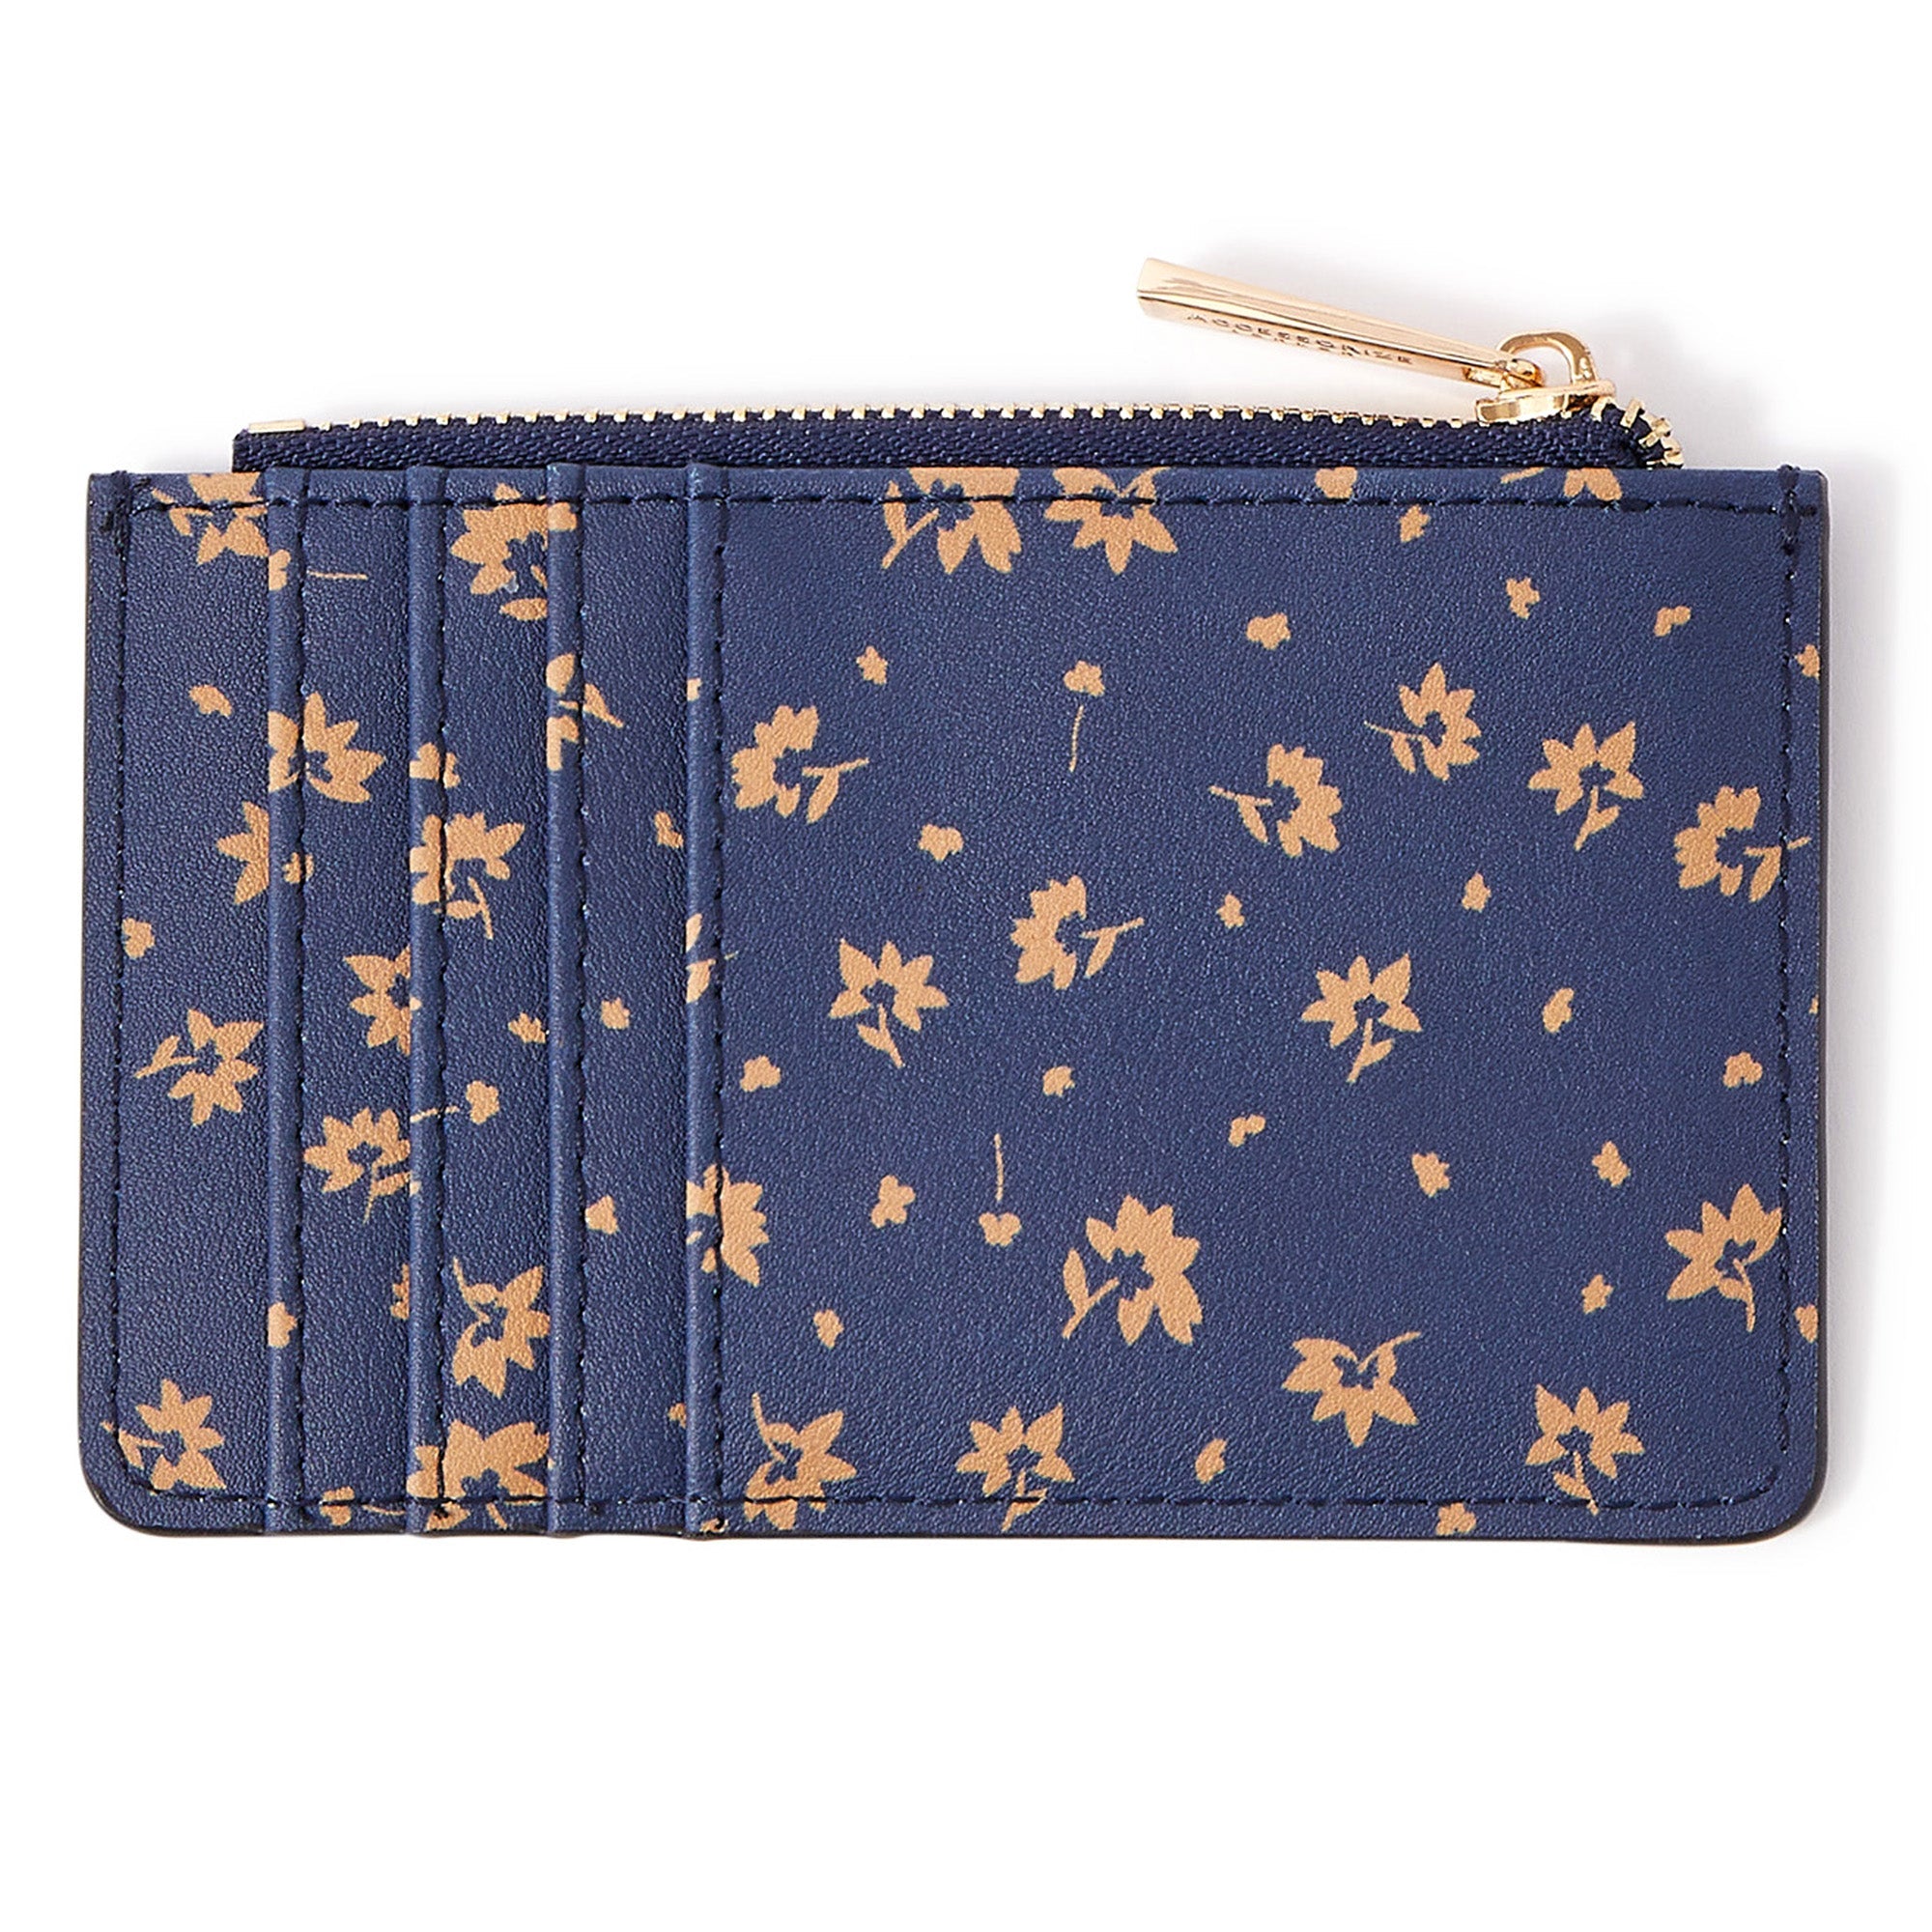 Accessorize London Women's Faux Leather Navy Ditsy Print Cardholder